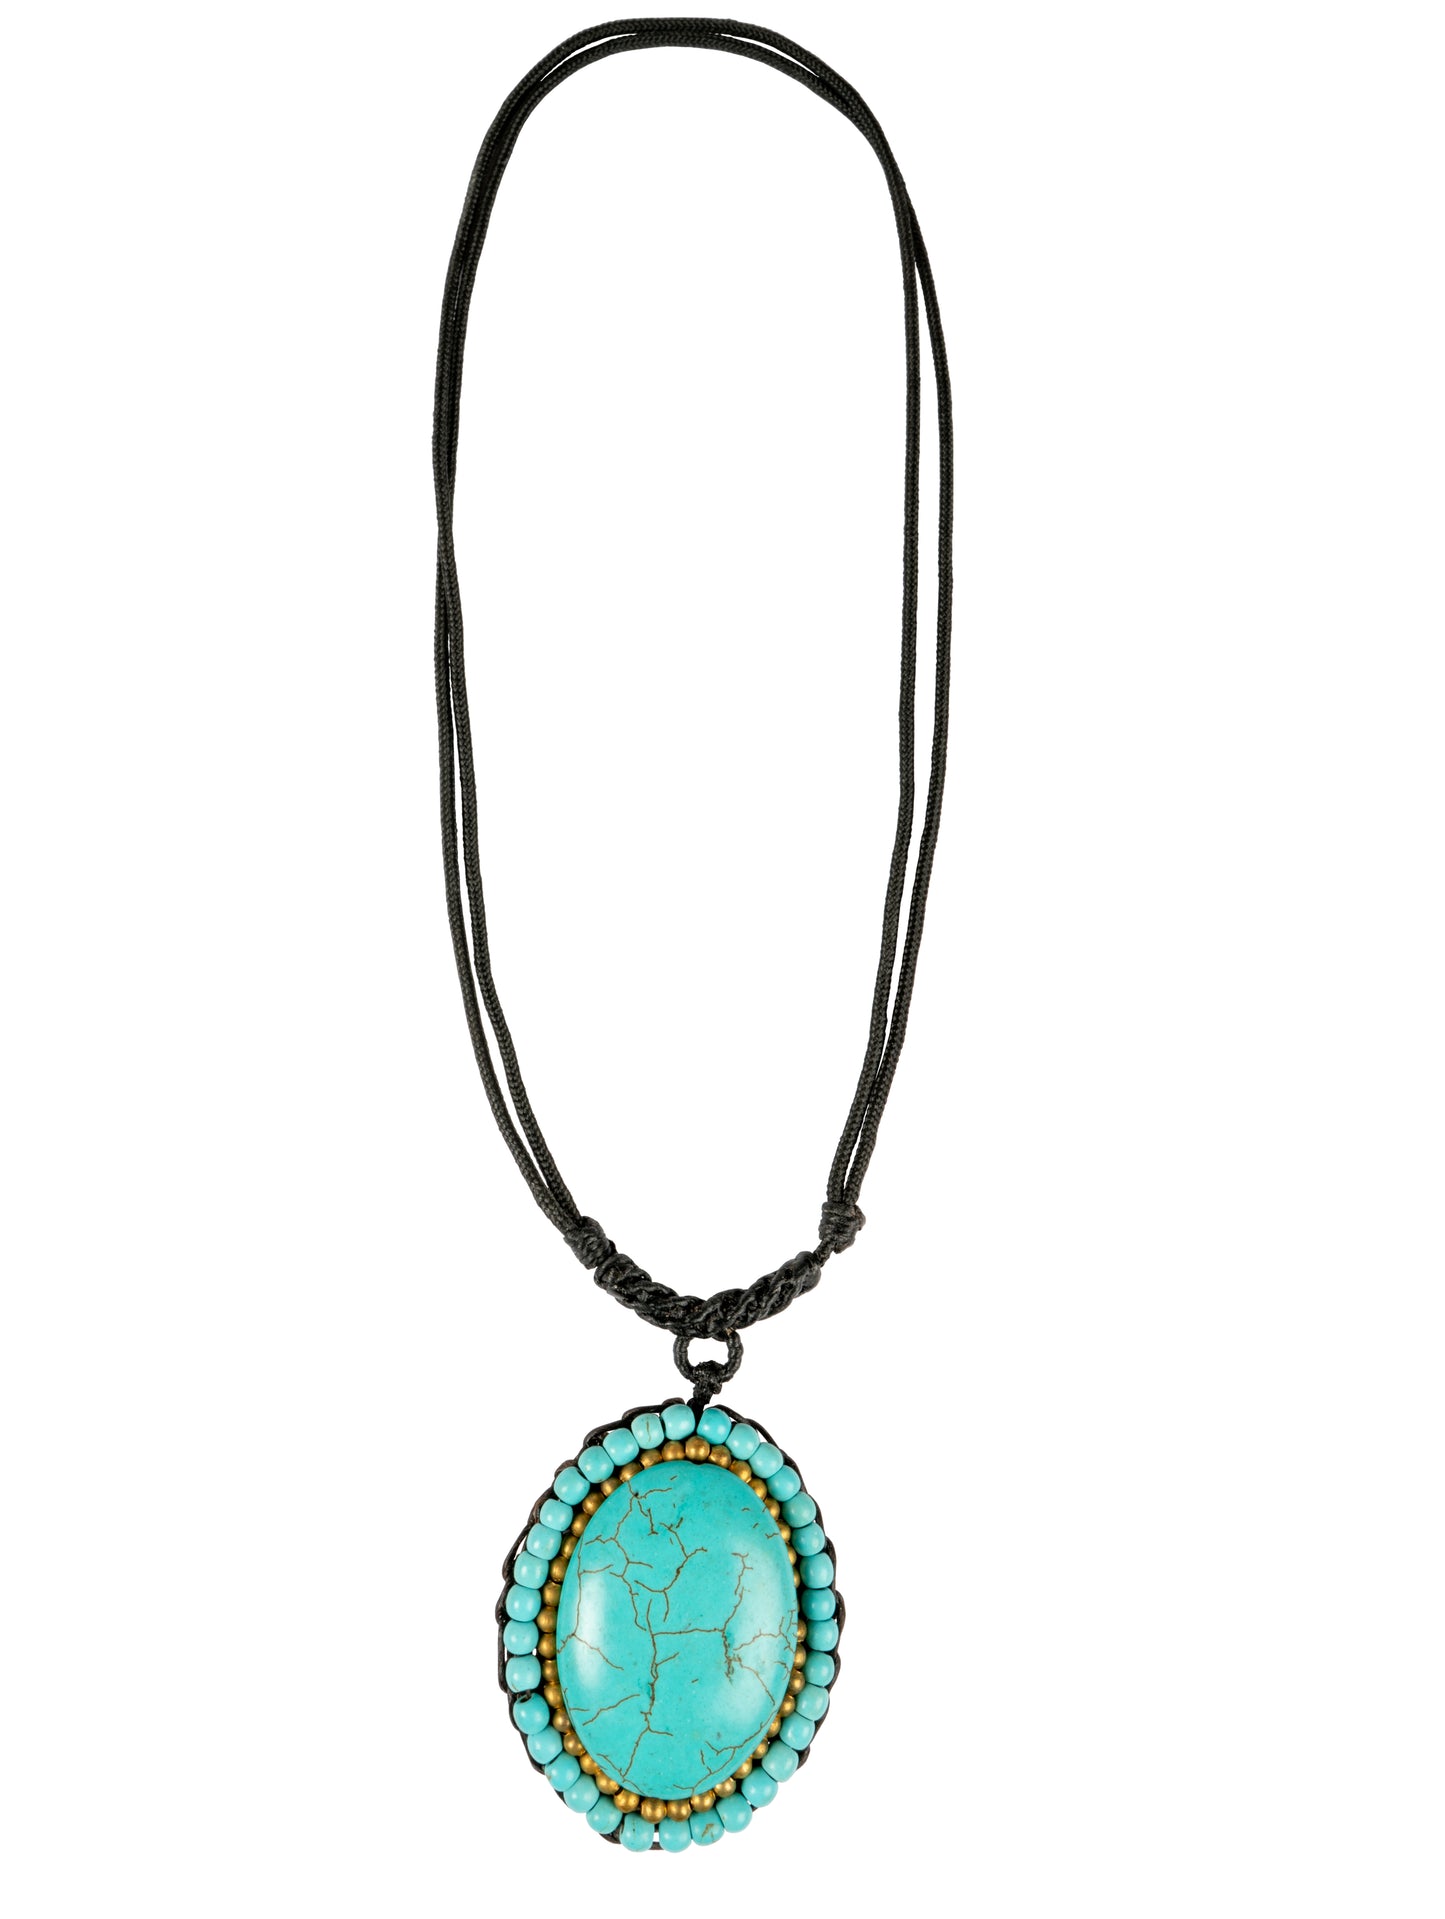 Nylon Necklace with Stone Oval Turquoise, Modern Boho Jewelry, Summer Fashion - CCCollections